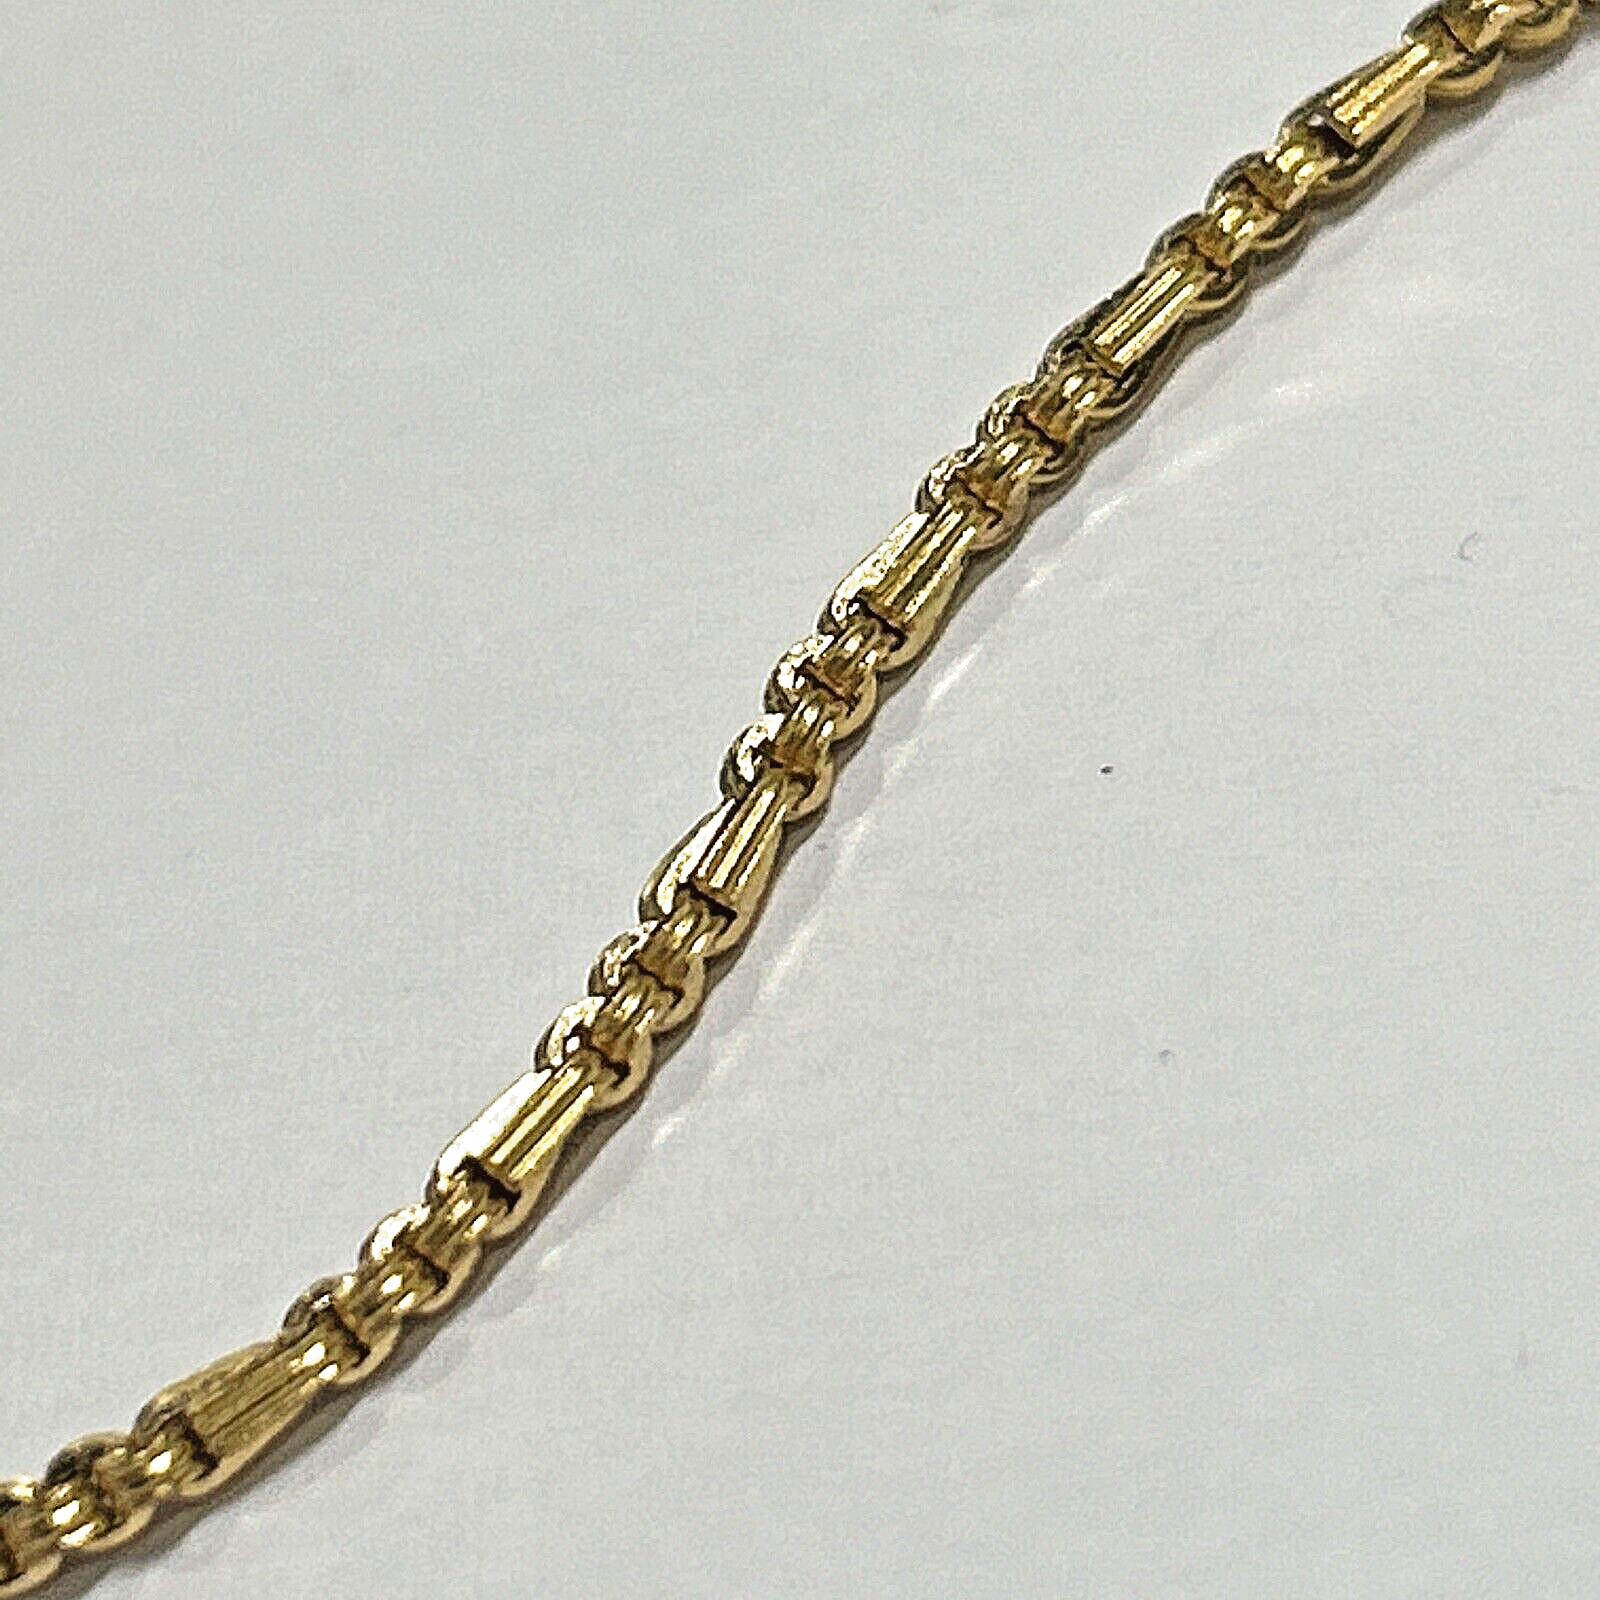 22k 916 Gold Chain - 24 Inches - 16.3 Grams - .916 Pure Gold